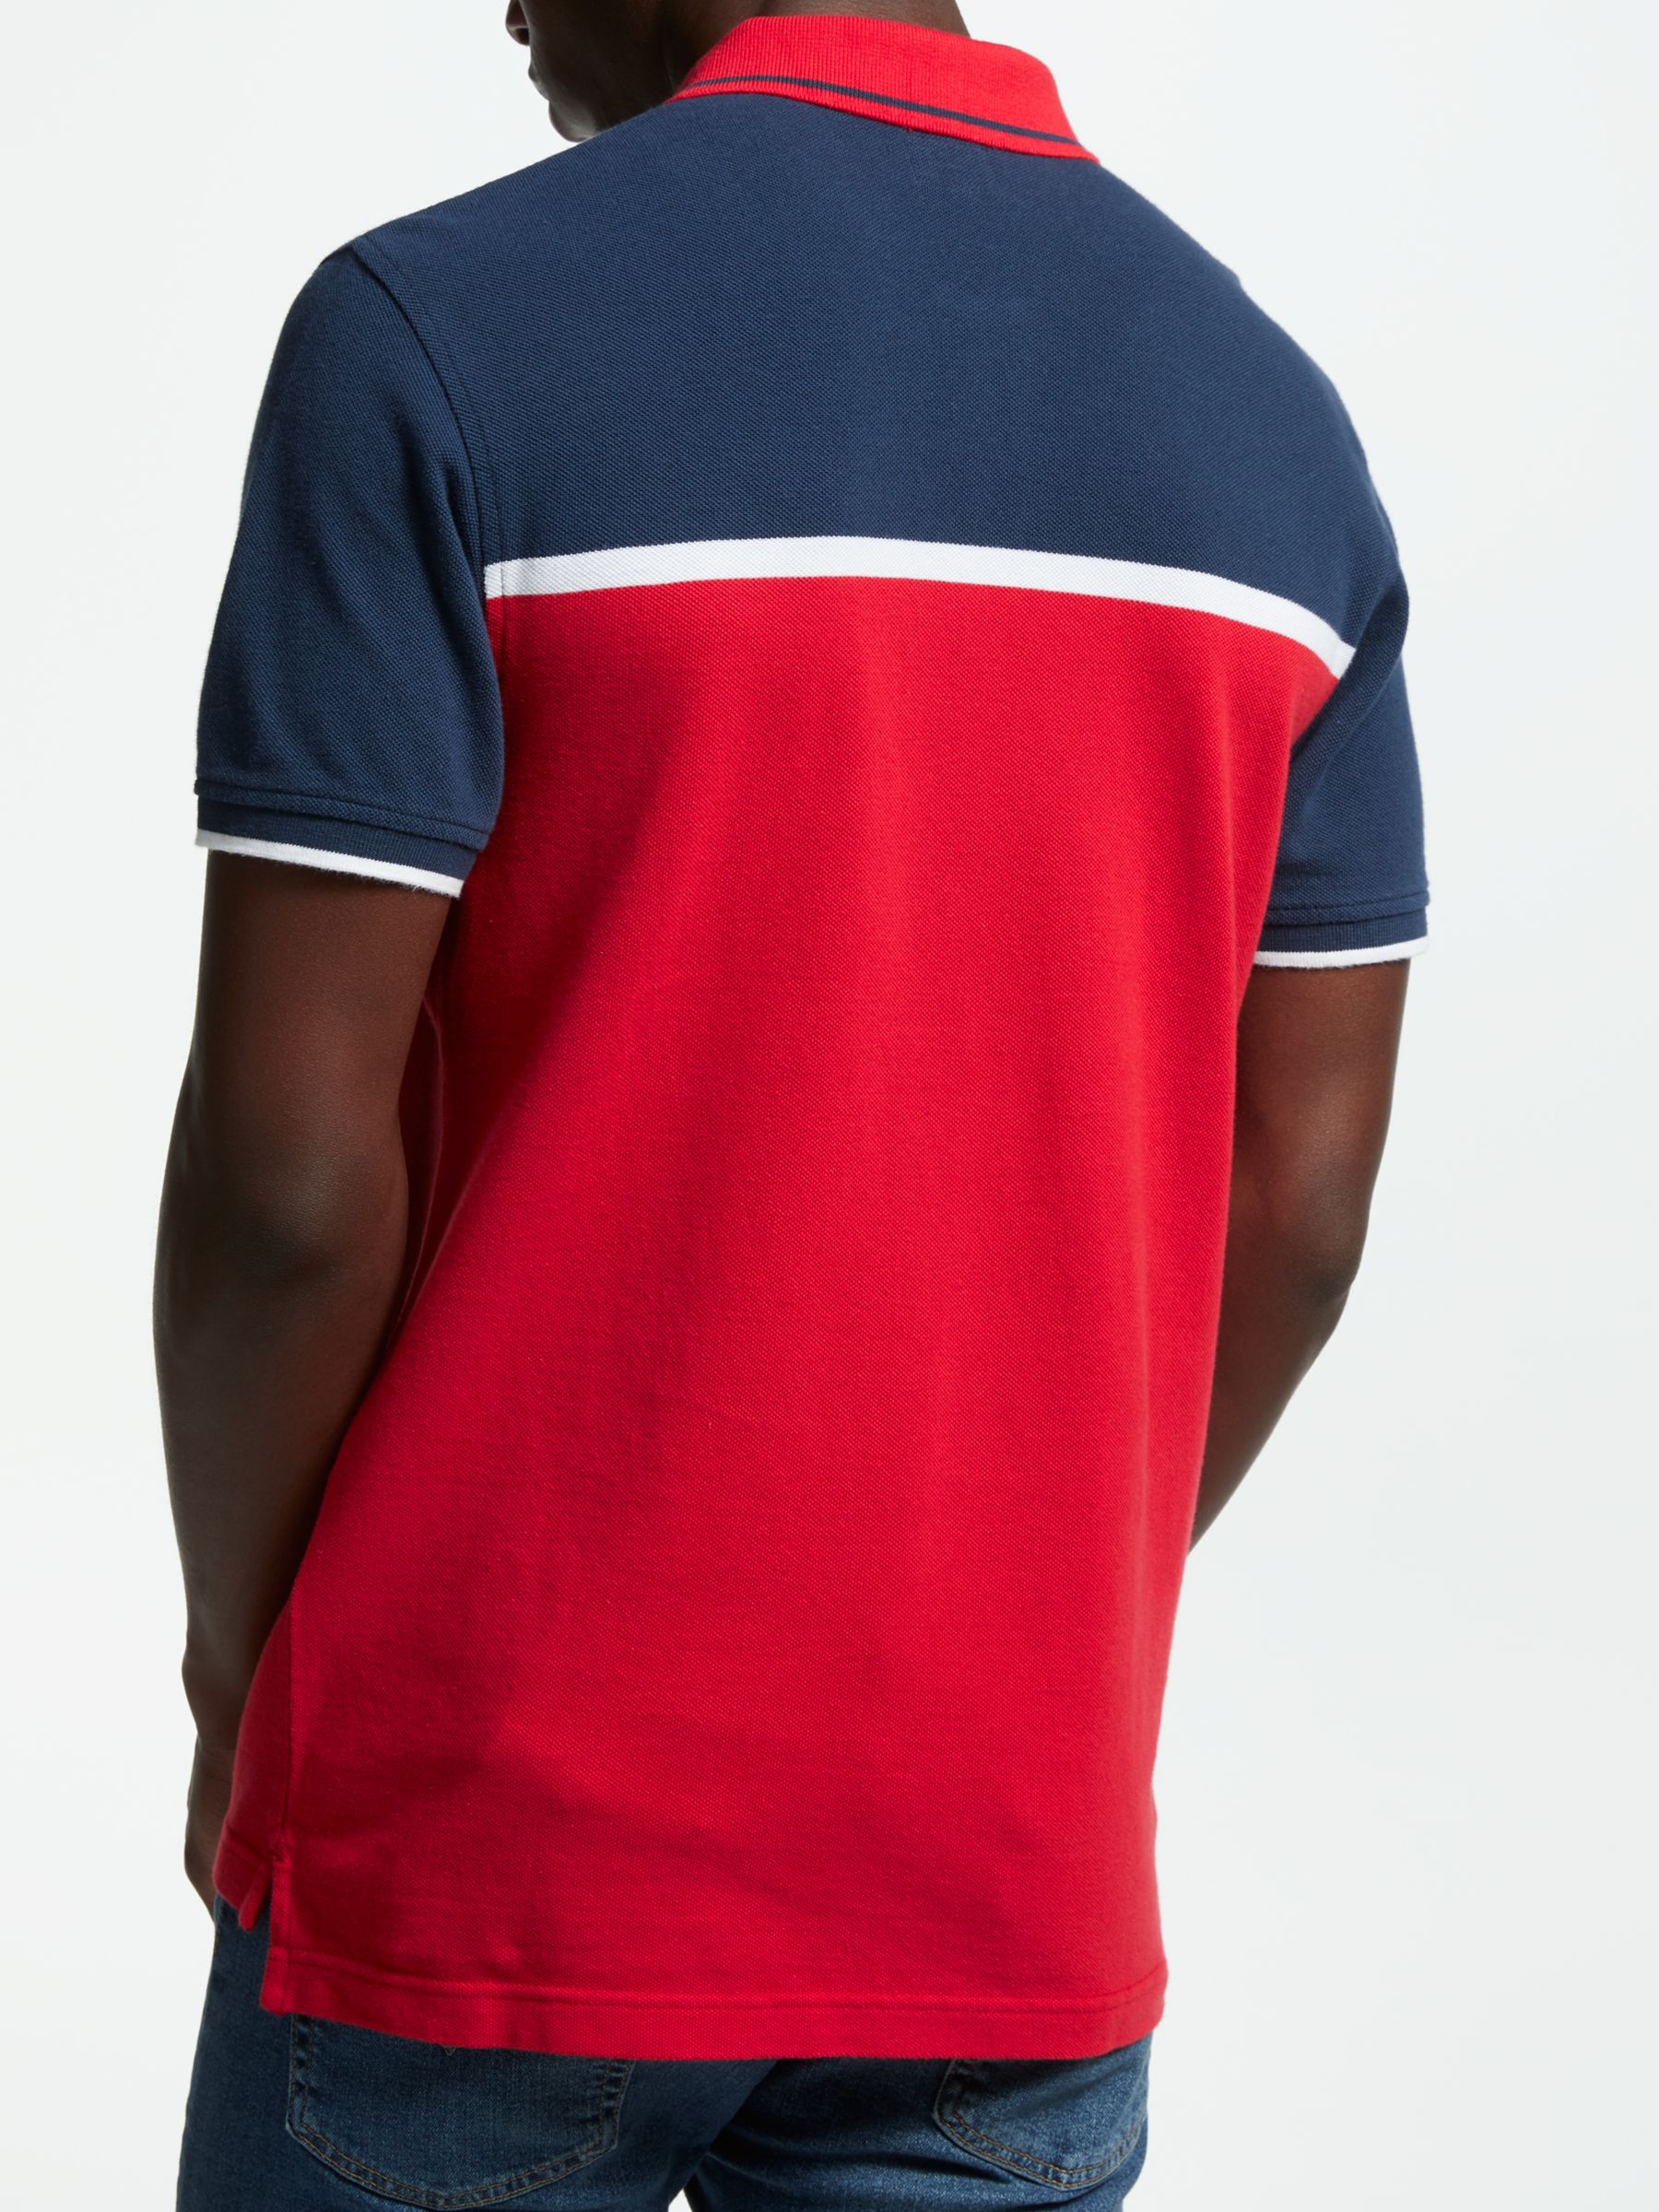 levi's red polo shirt